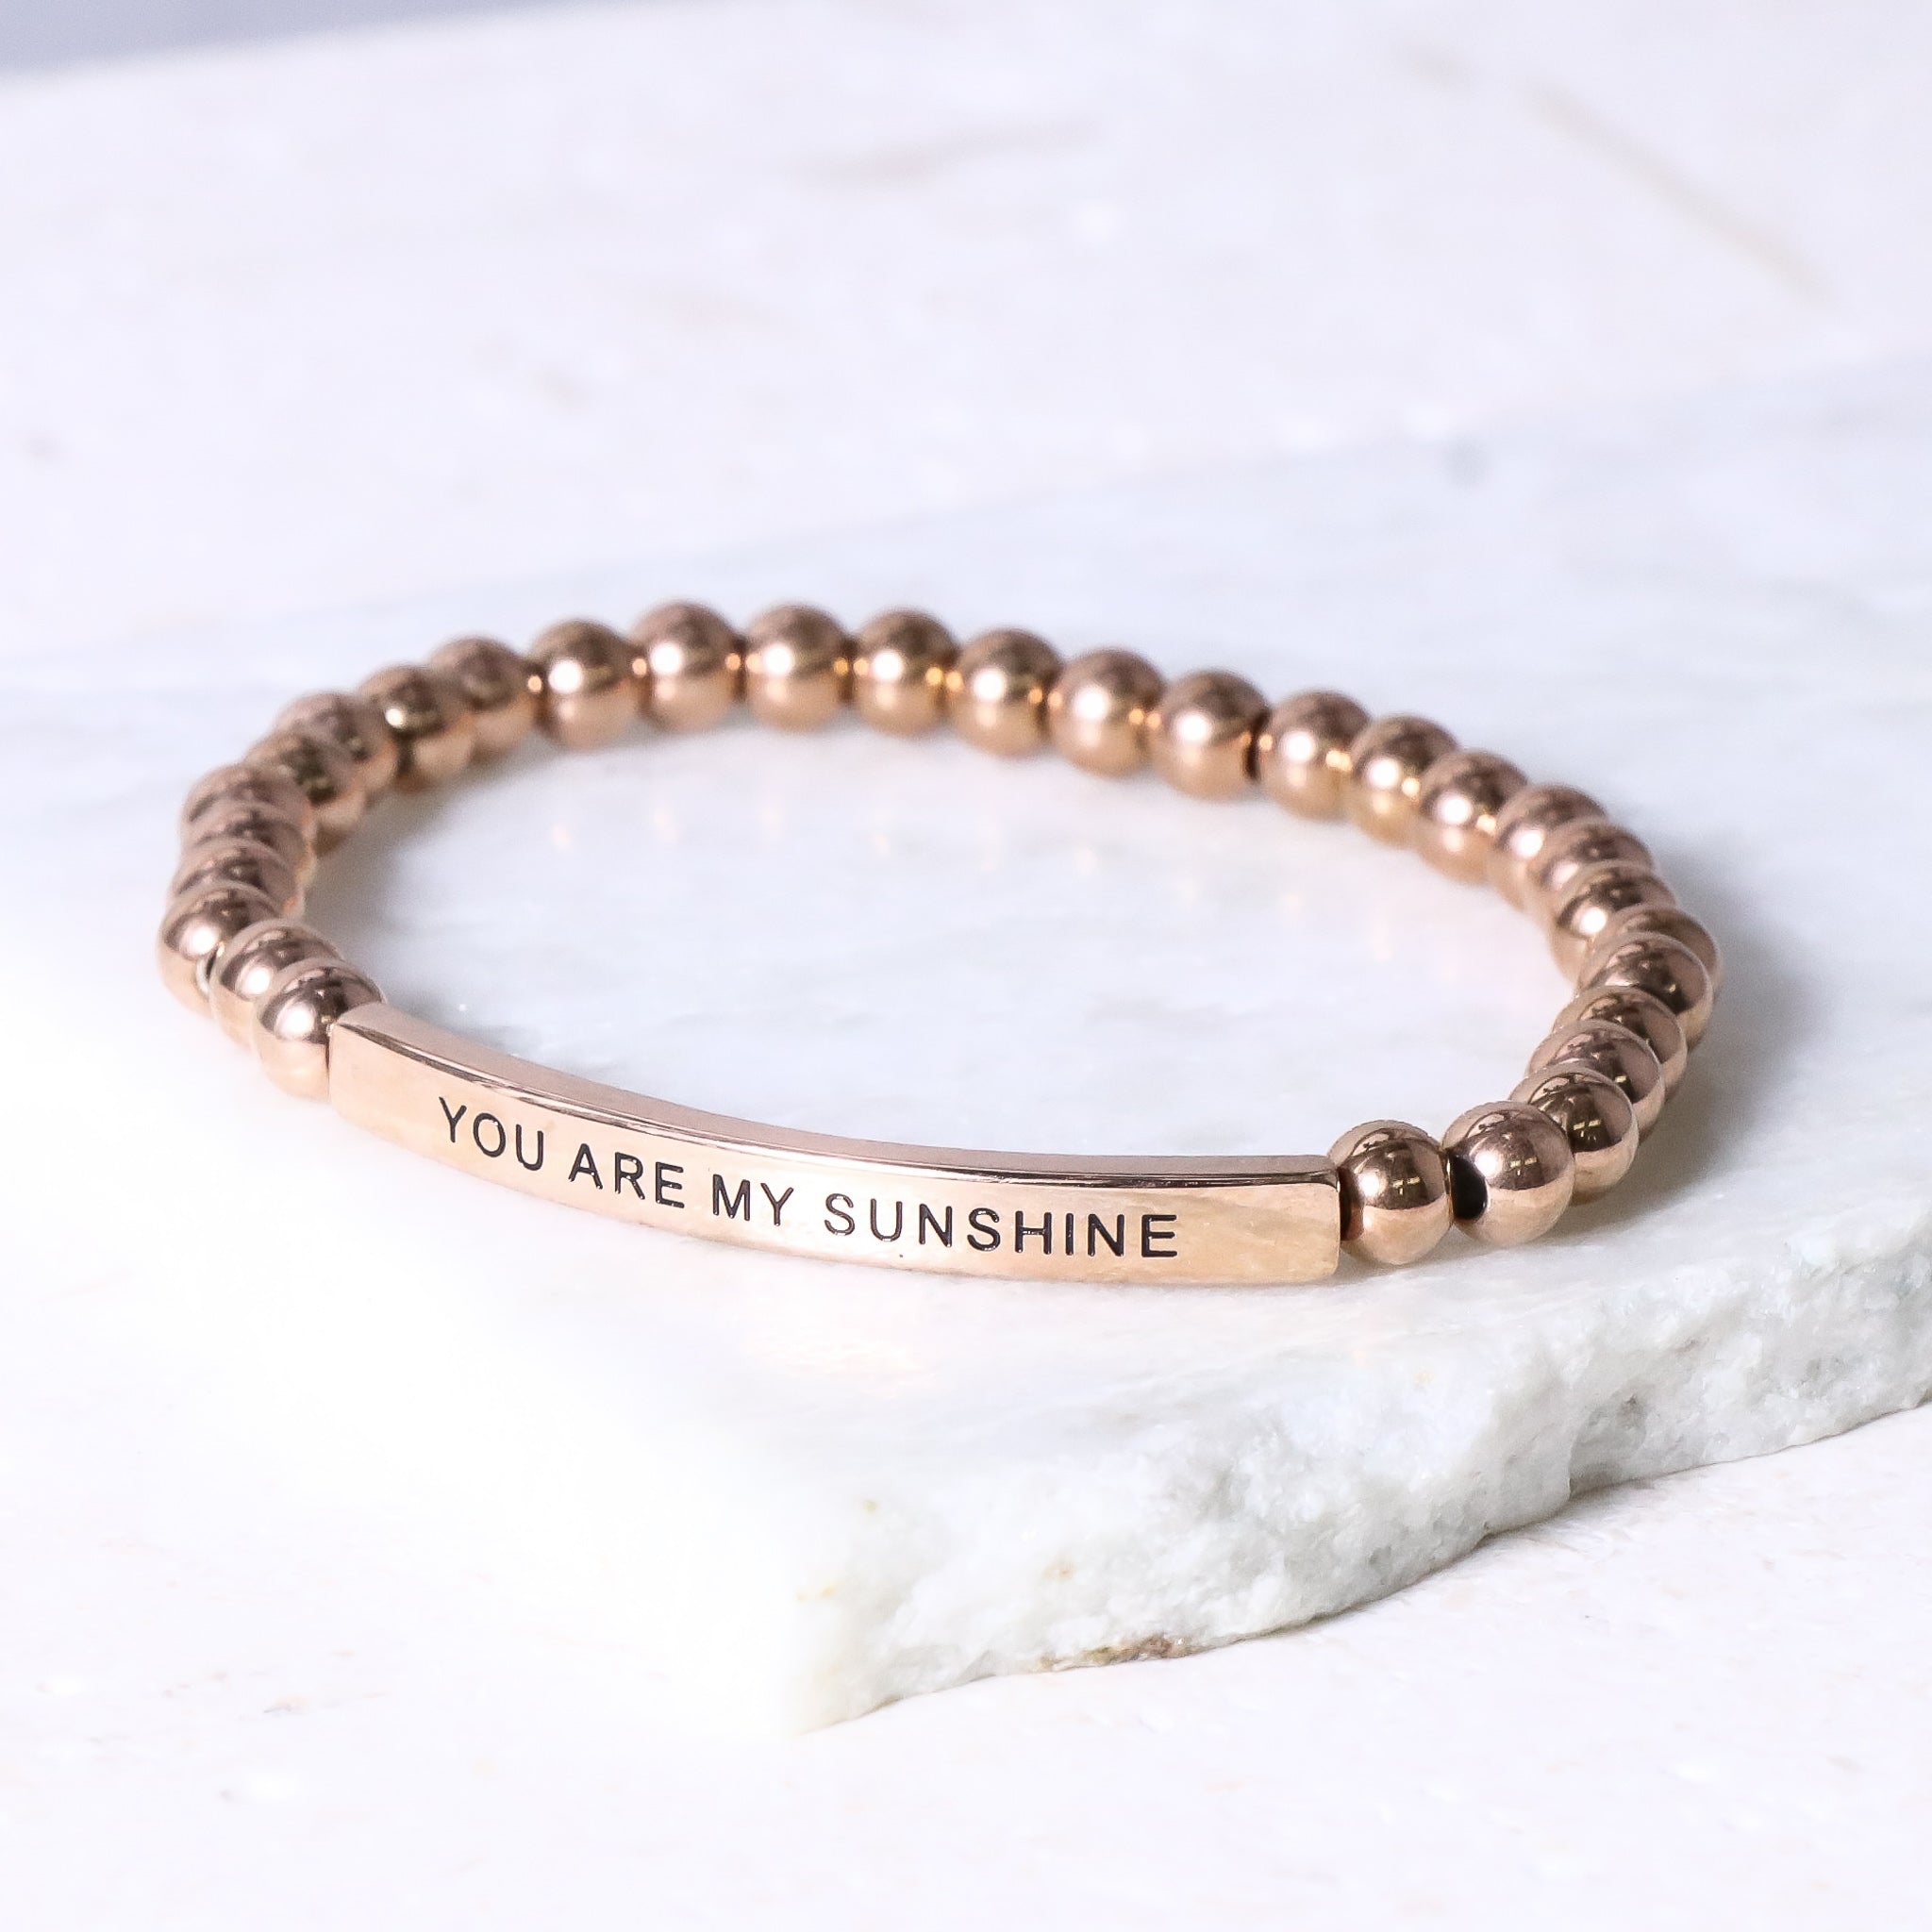 YOU ARE MY SUNSHINE - Inspiration Co.